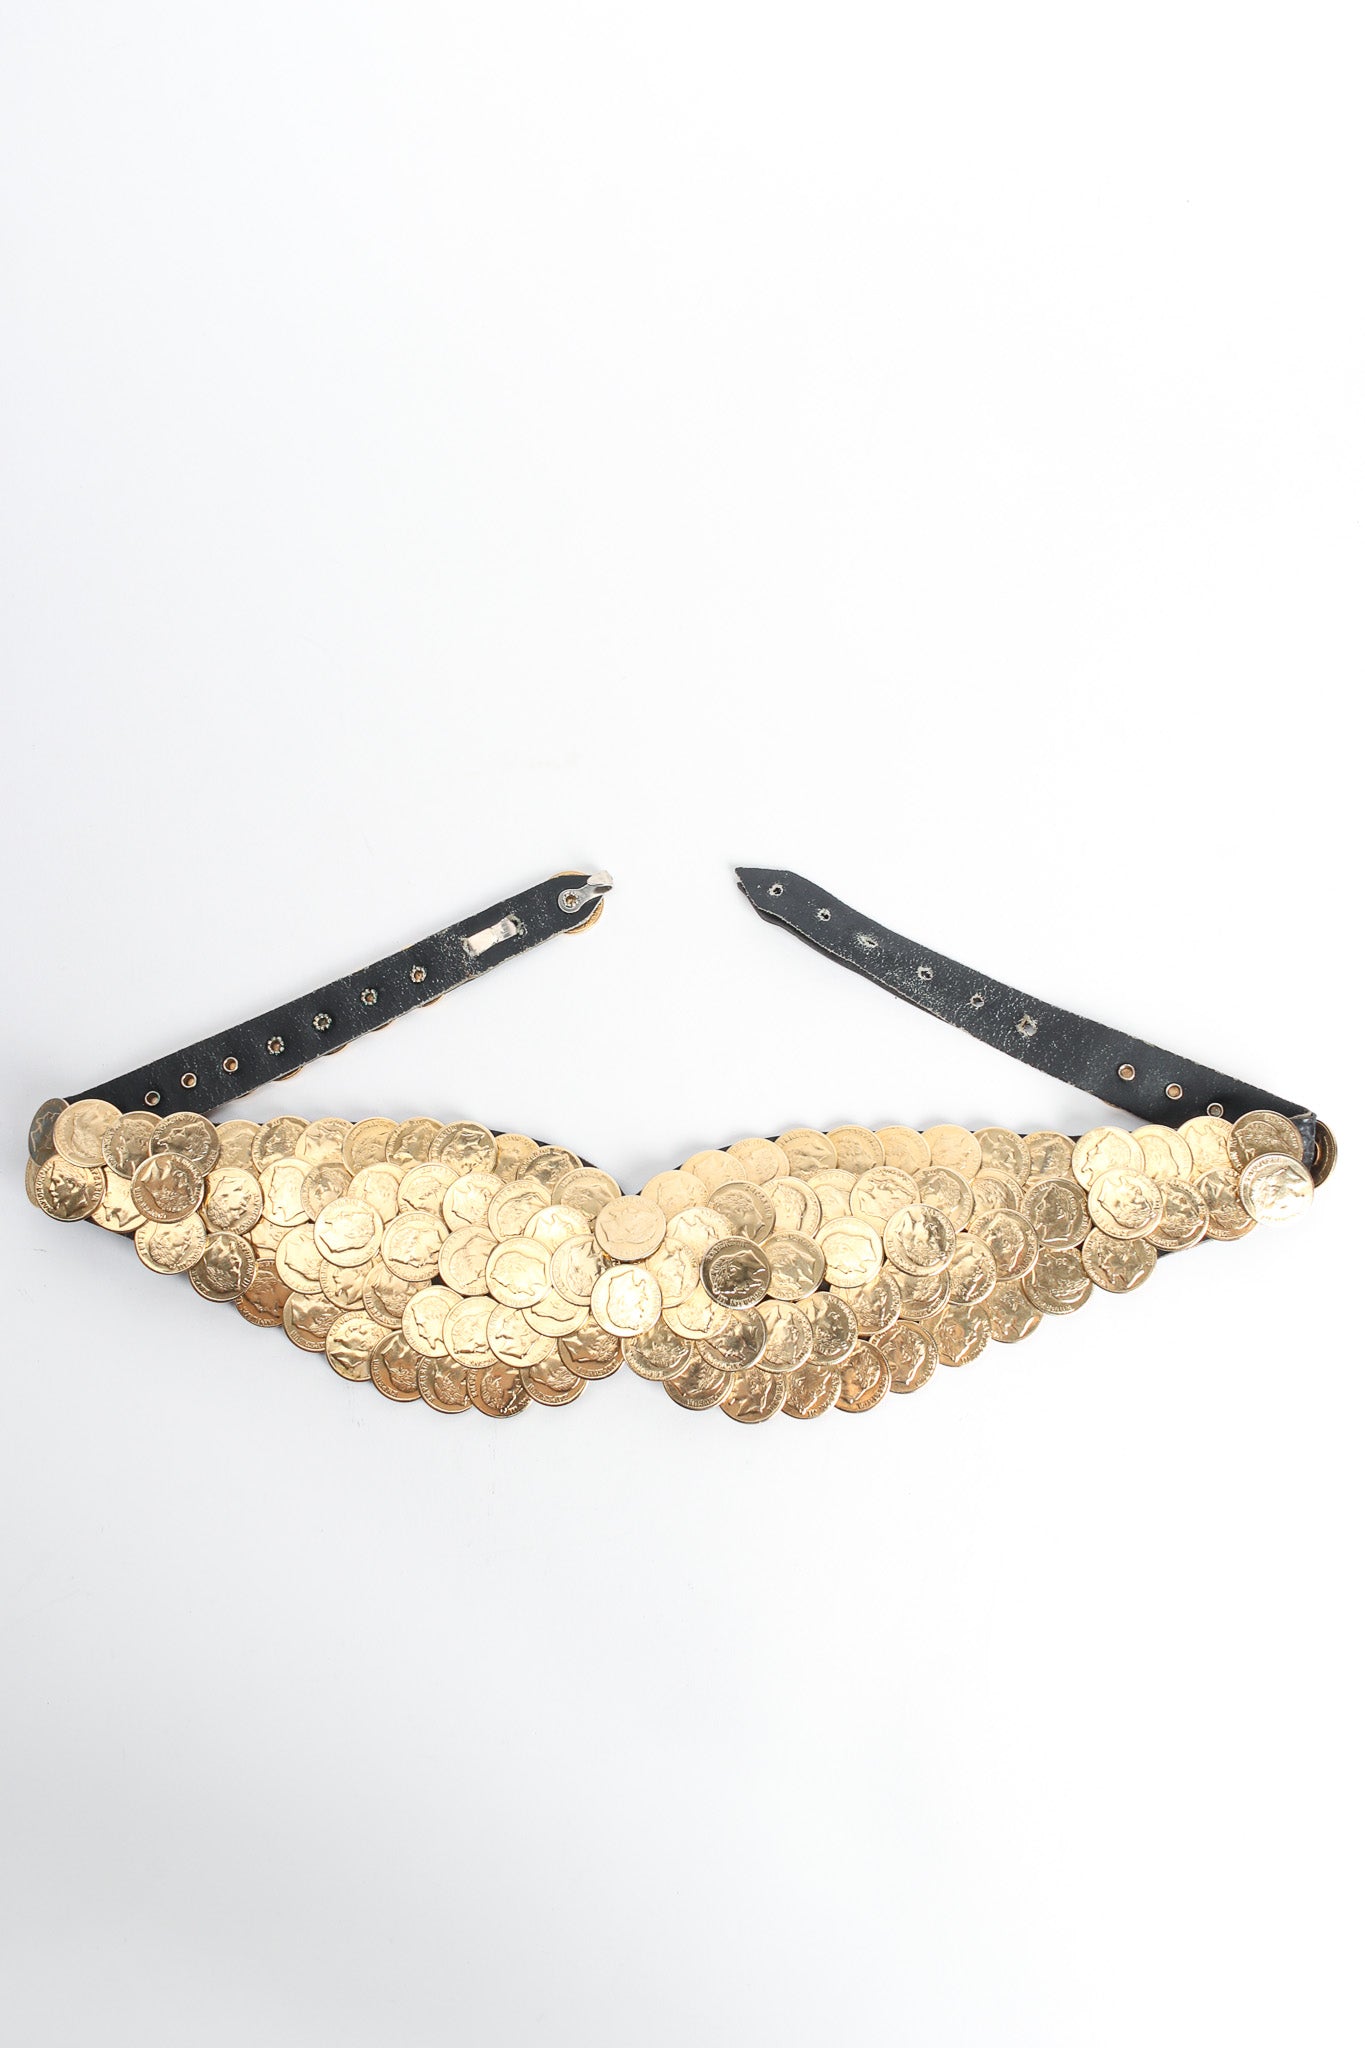 statement belt with gold coins by Jose Cotel flat lay @recessla